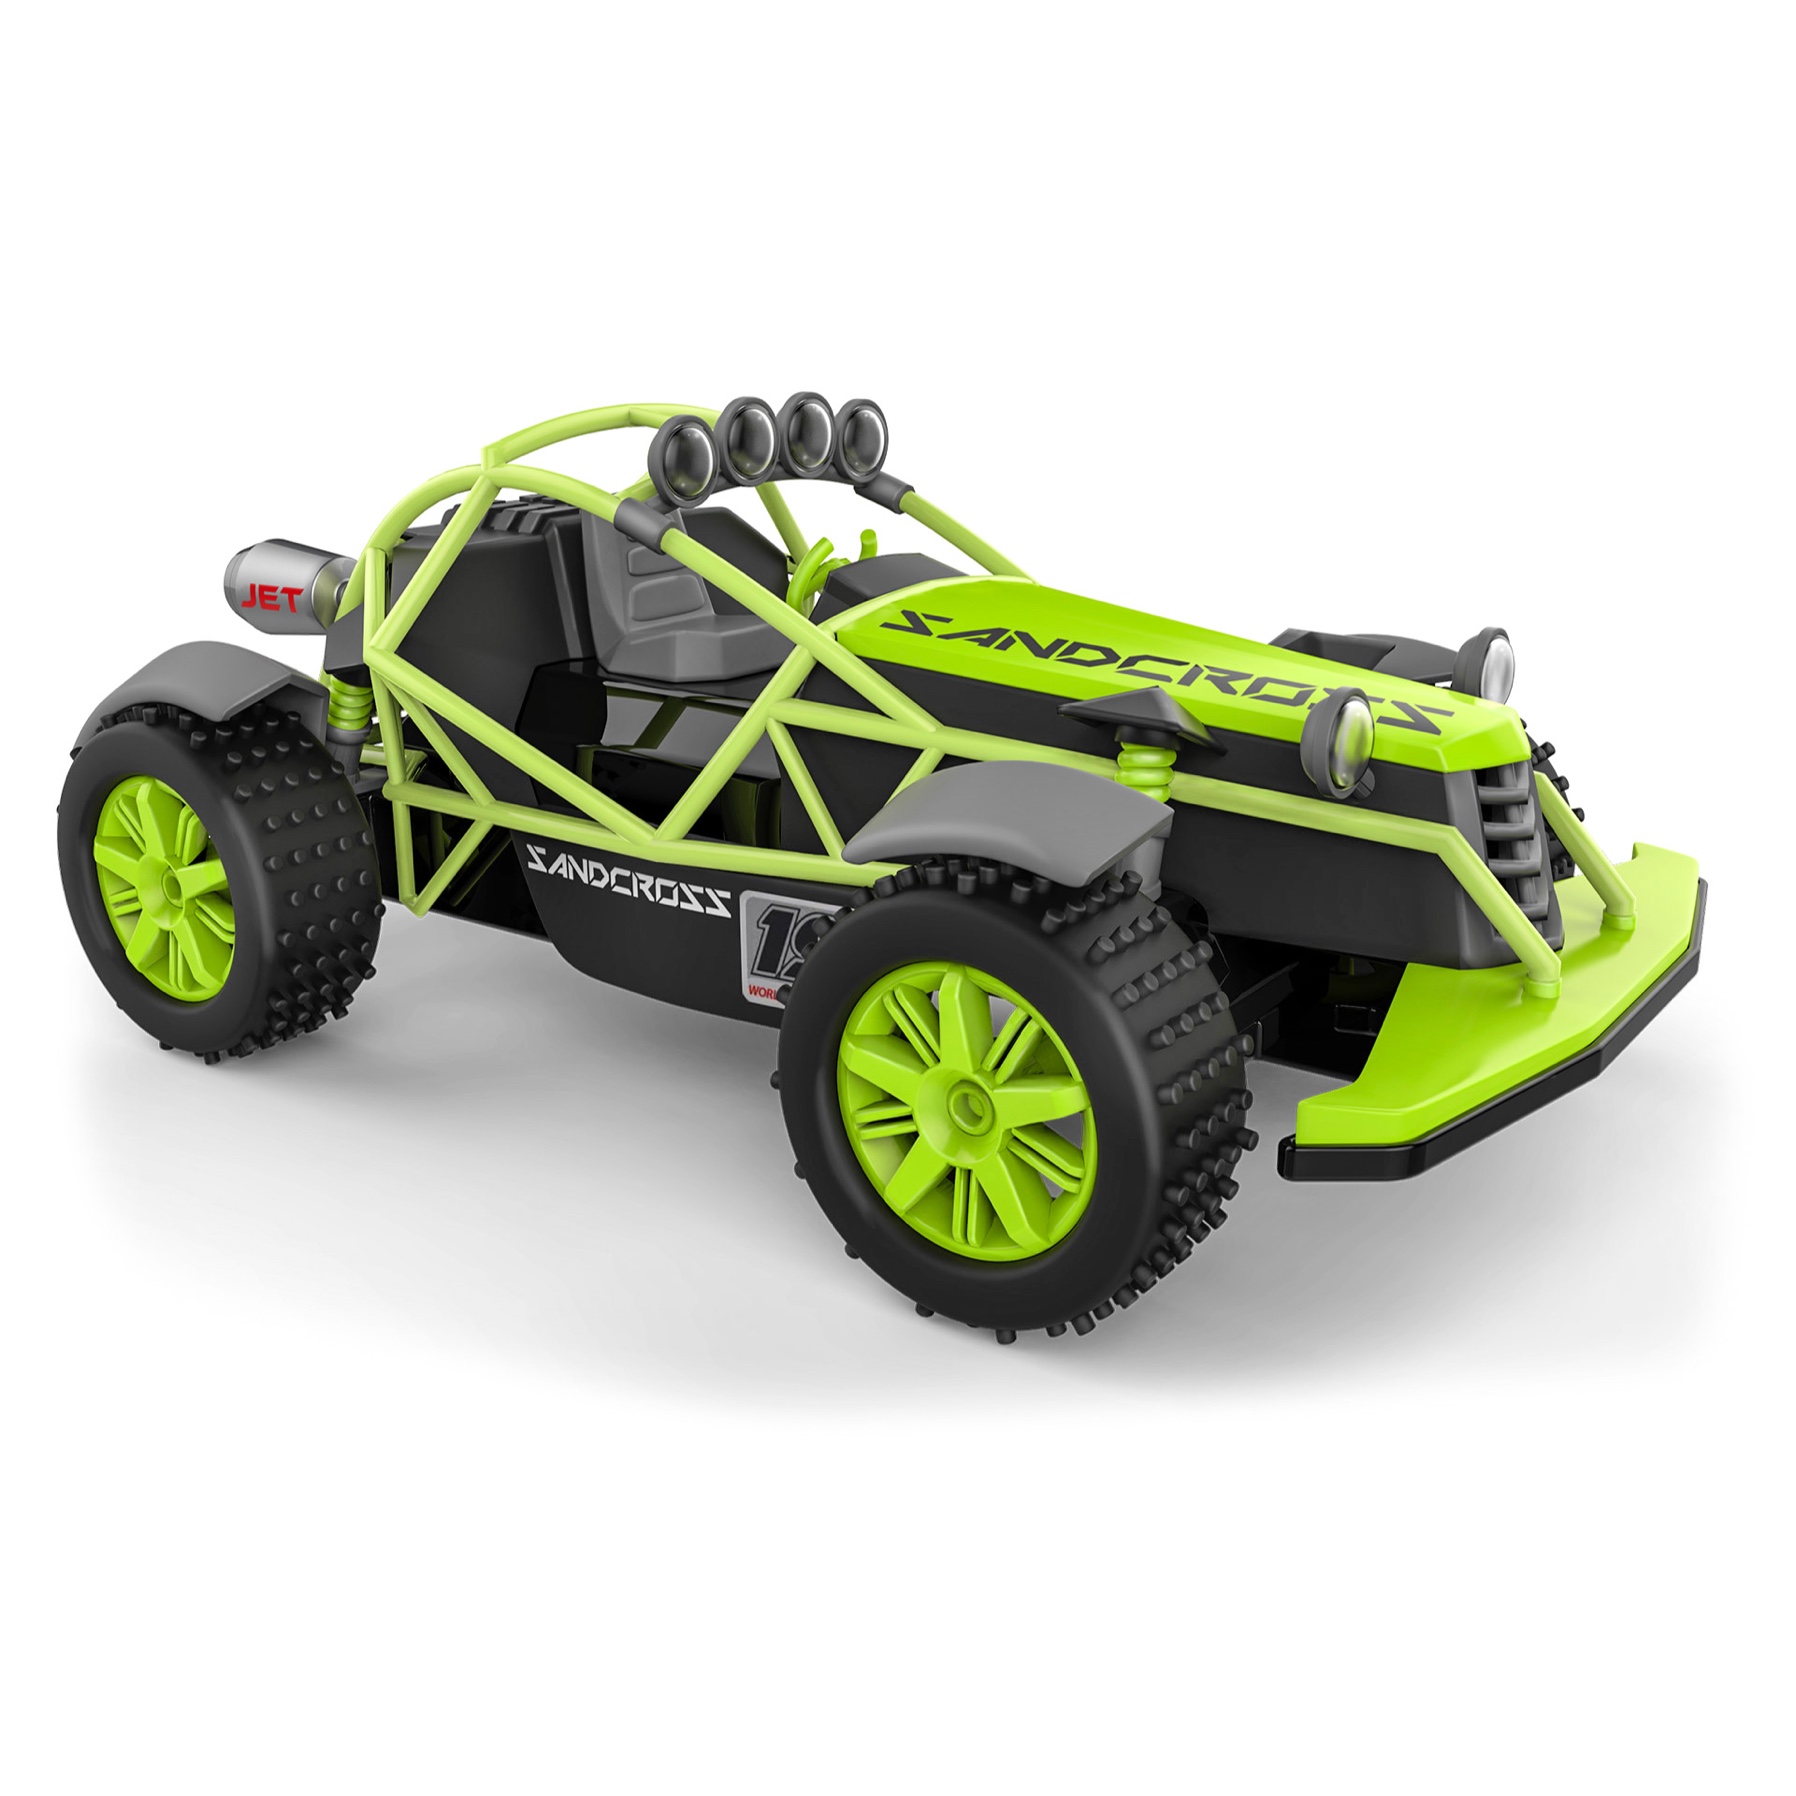 TAIYO Sandcross Glow in The Dark Remote Control Car for sale online 